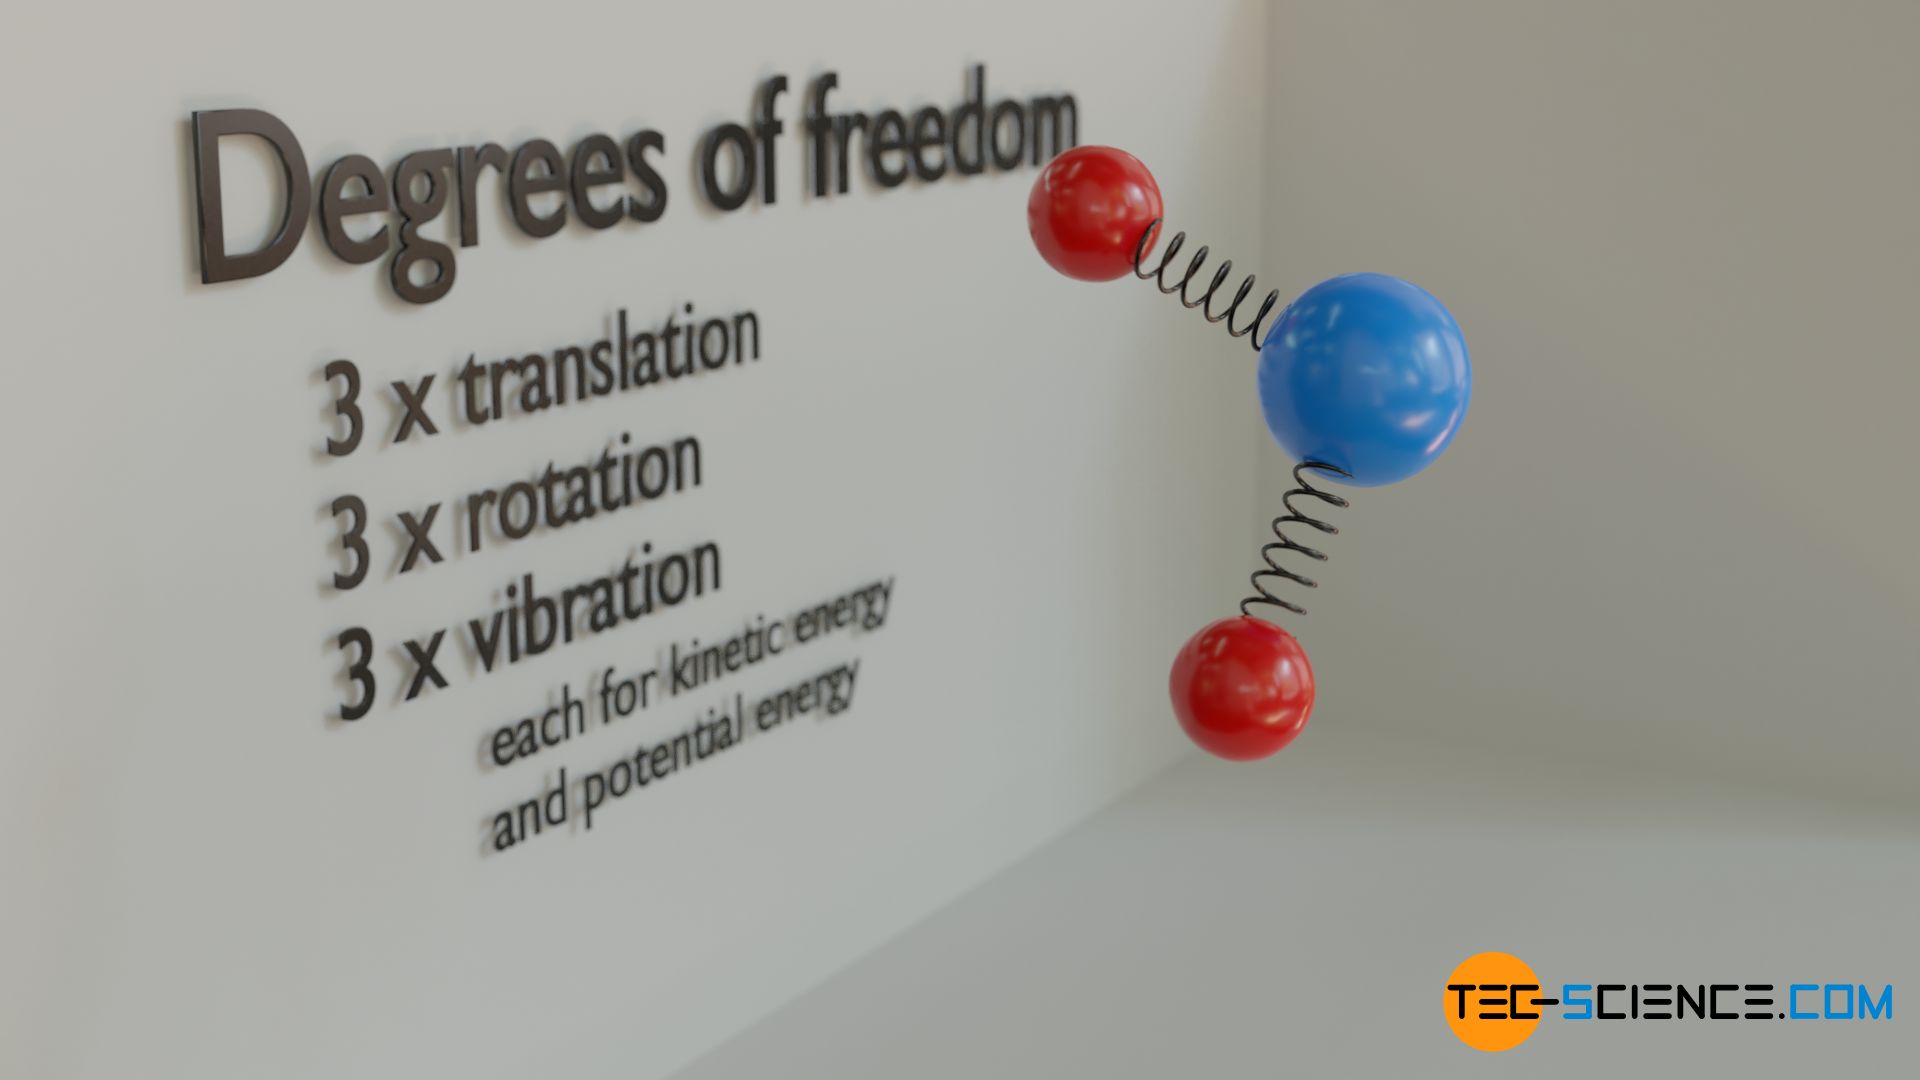 Degrees of freedom of a molecule